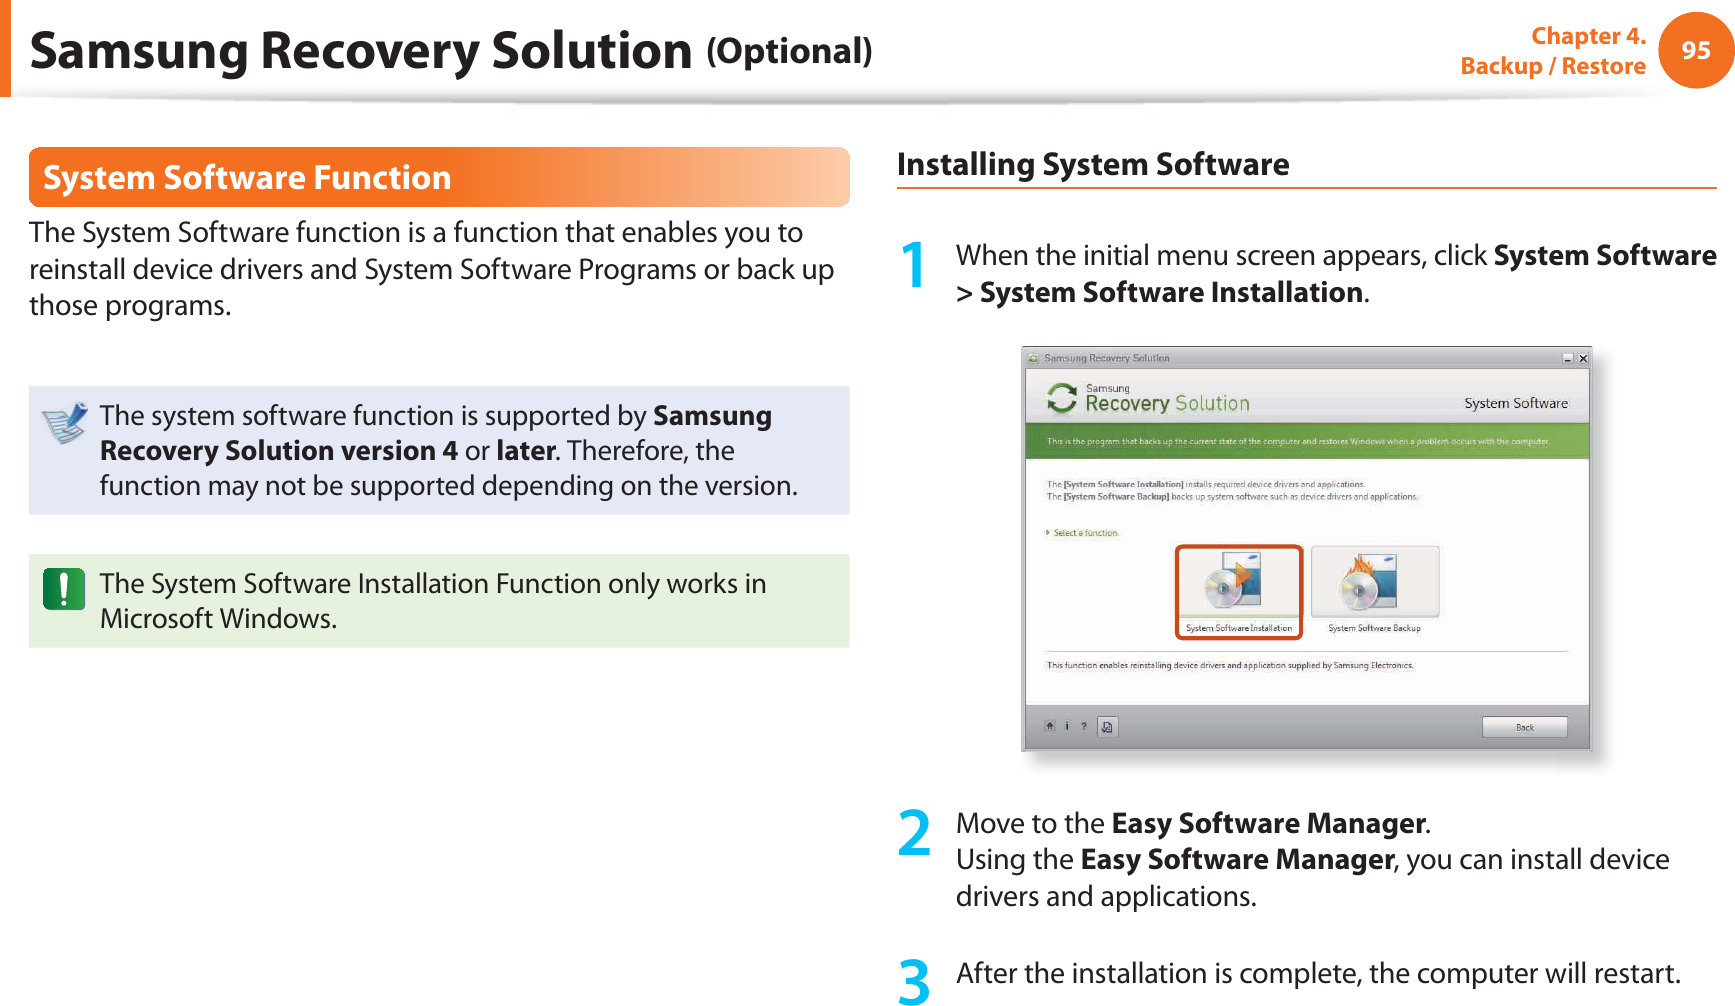 95Chapter 4.  Backup / RestoreSystem Software FunctionThe System Software function is a function that enables you to reinstall device drivers and System Software Programs or back up those programs. The system software function is supported by Samsung Recovery Solution version 4 or later. Therefore, the function may not be supported depending on the version.The System Software Installation Function only works in Microsoft Windows.Installing System Software1  When the initial menu screen appears, click System Software &gt; System Software Installation.2  Move to the Easy Software Manager.Using the Easy Software Manager, you can install device drivers and applications.3  After the installation is complete, the computer will restart.Samsung Recovery Solution (Optional)